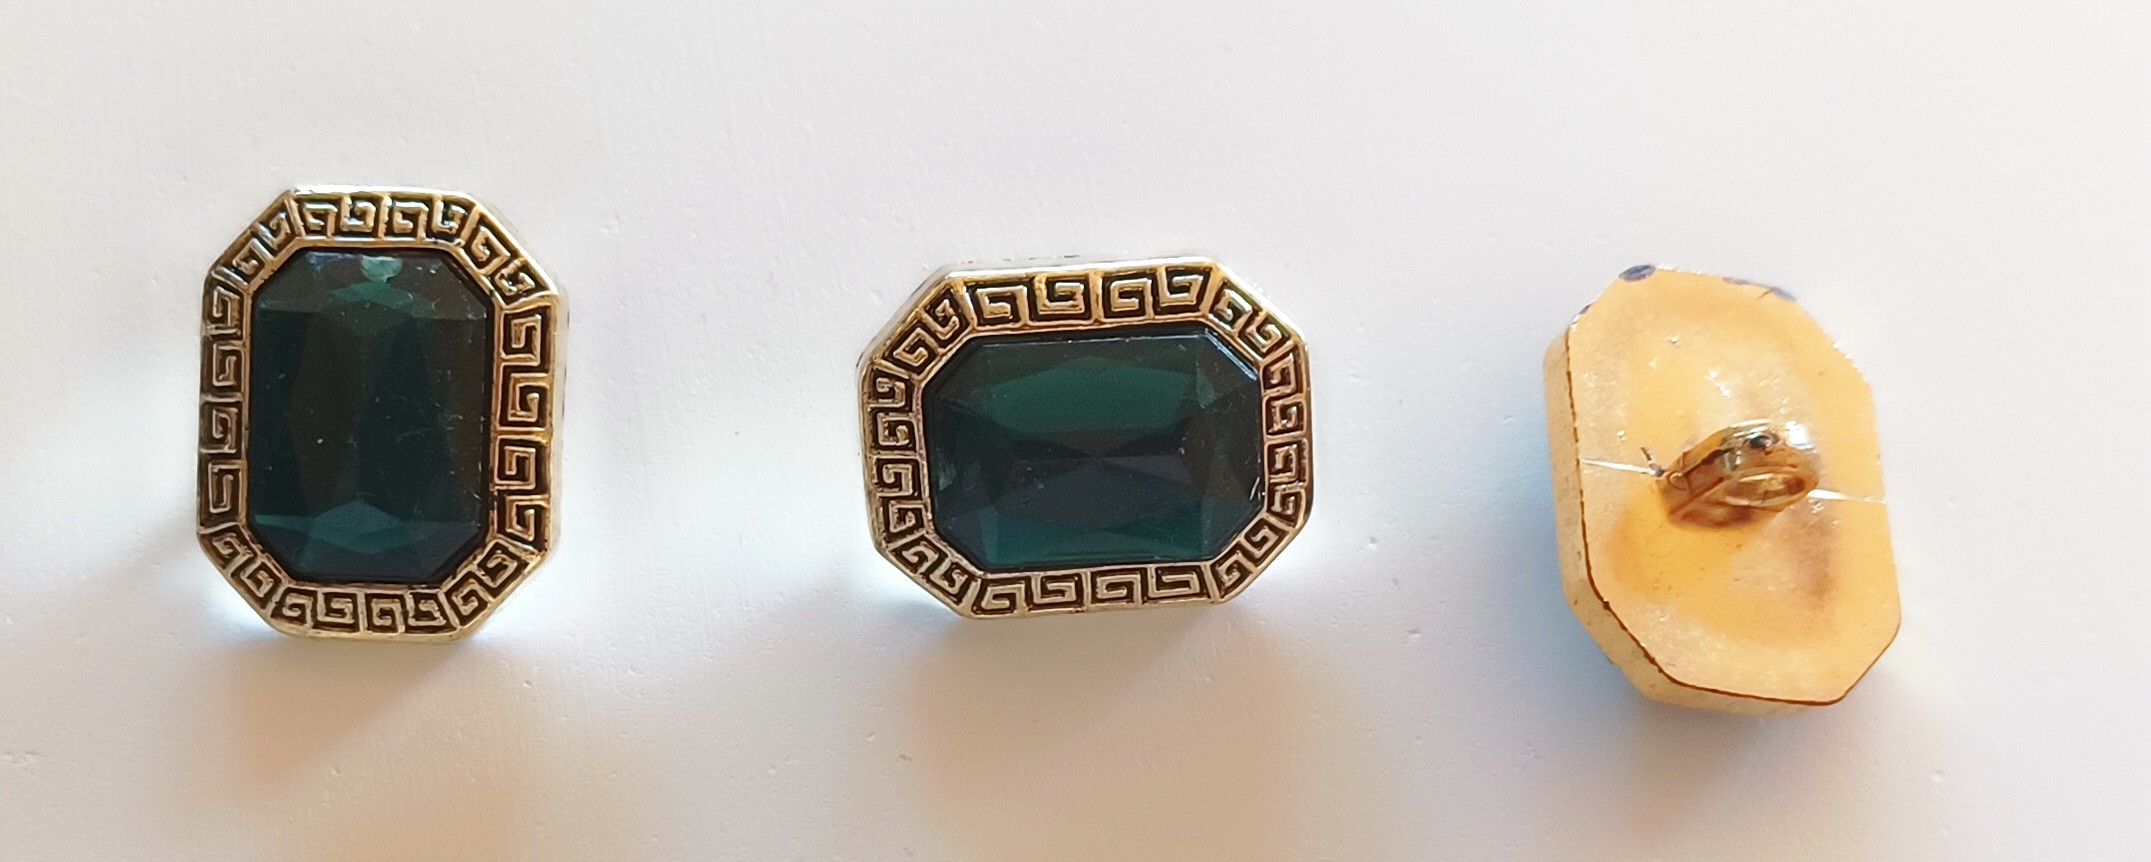 Gold/Black/Green Crystal Center 1" Shank Poly Button